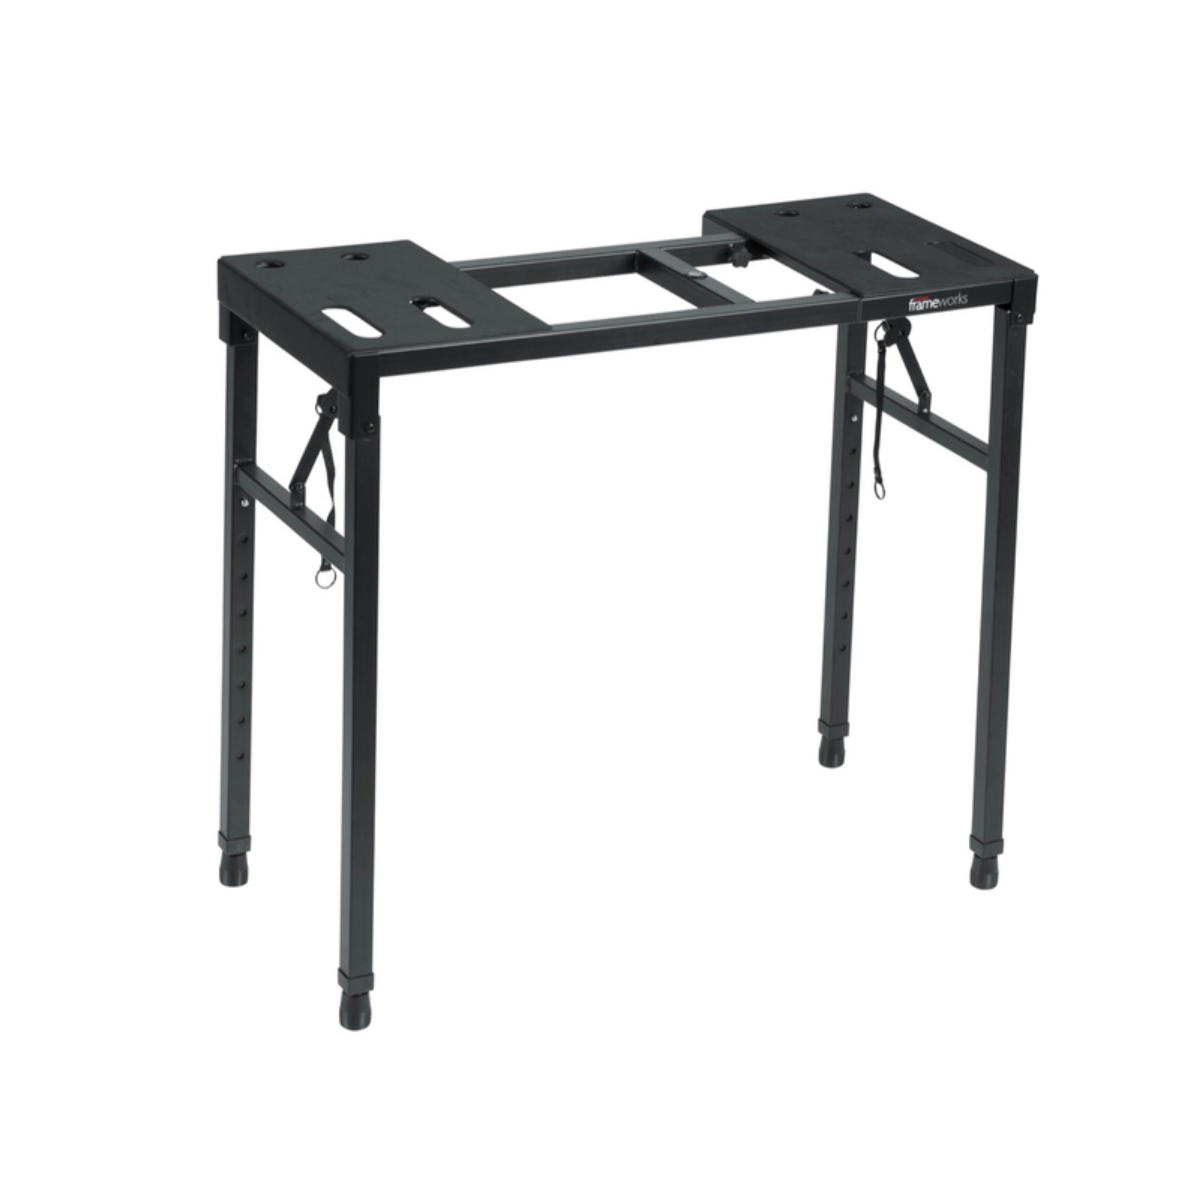 Gator Frameworks Heavy-Duty Table with Multi-Adjustable Extrusions and Built In Levelling Assist